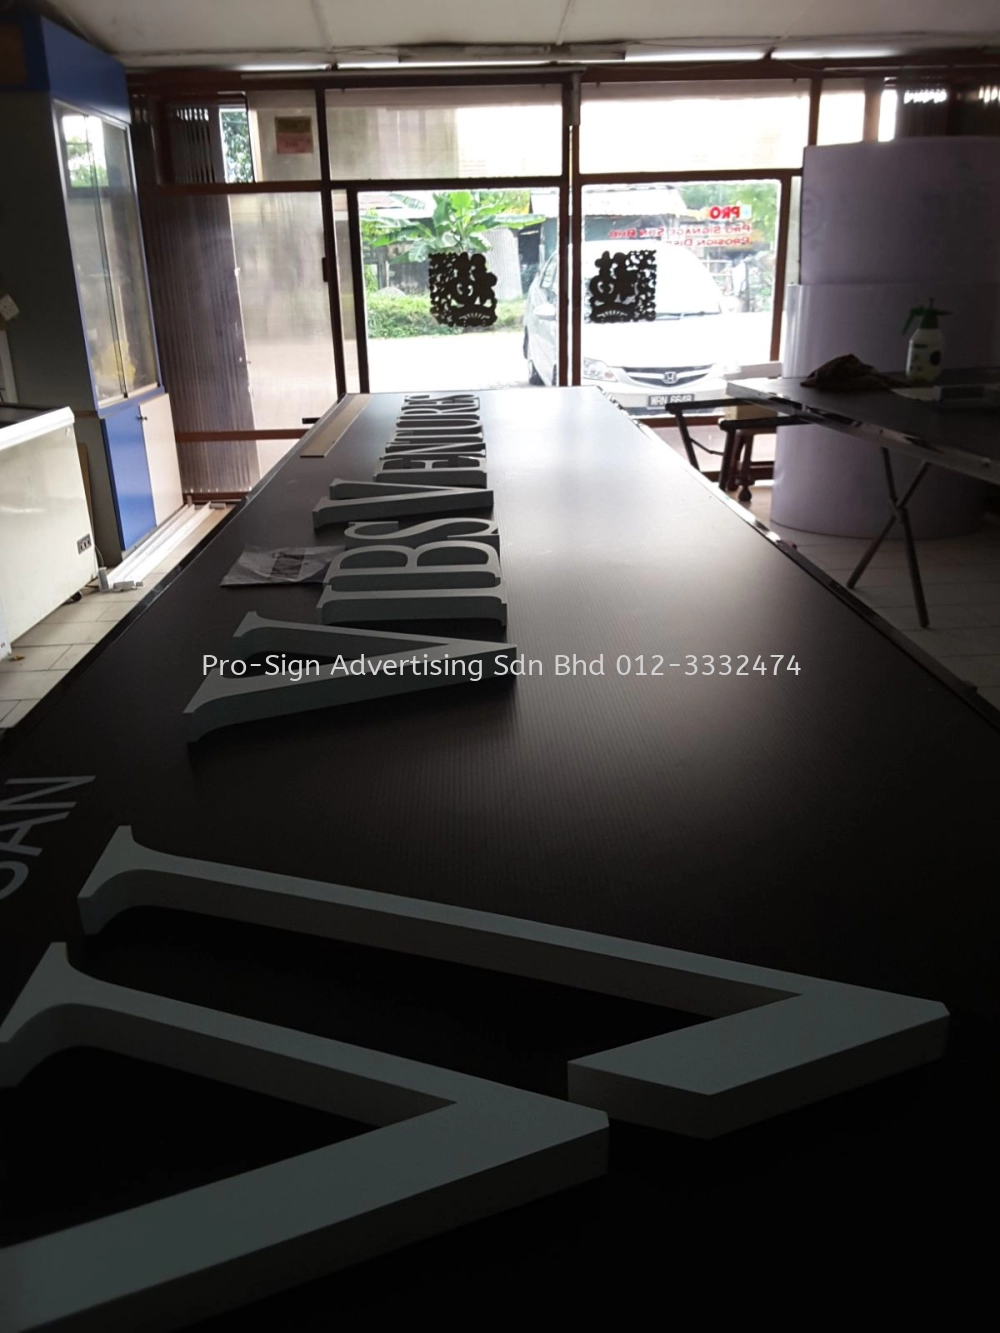 STAINLESS STEEL BOX UP INDOOR SIGNAGE & EG BOX UP OUTDOOR SIGNAGE(VIBS VENTURE, KL, 2016)